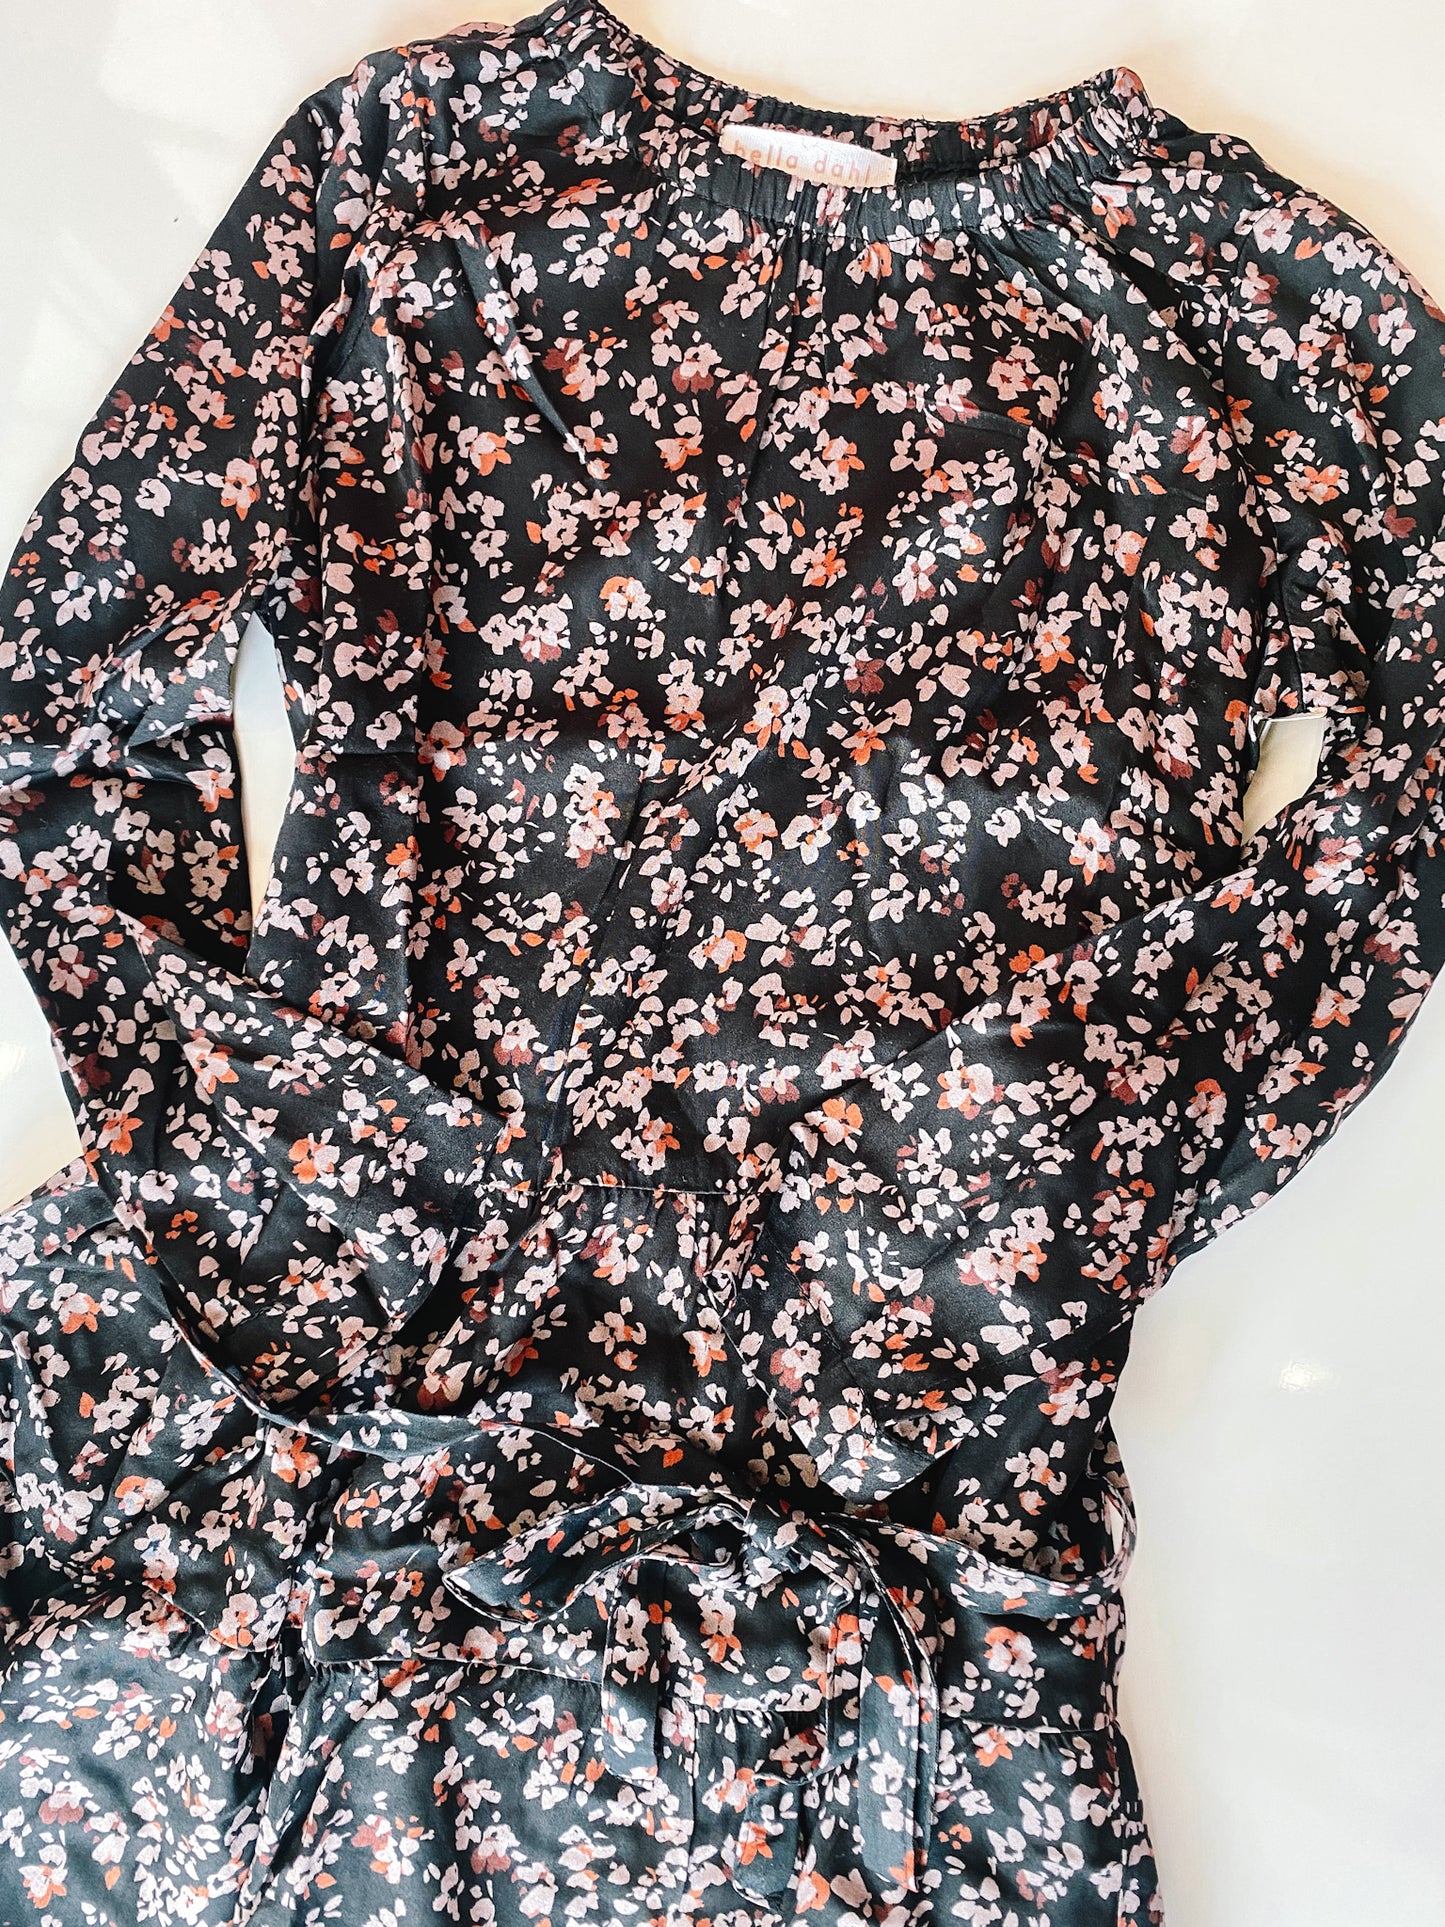 Tiered Floral Dress (6)